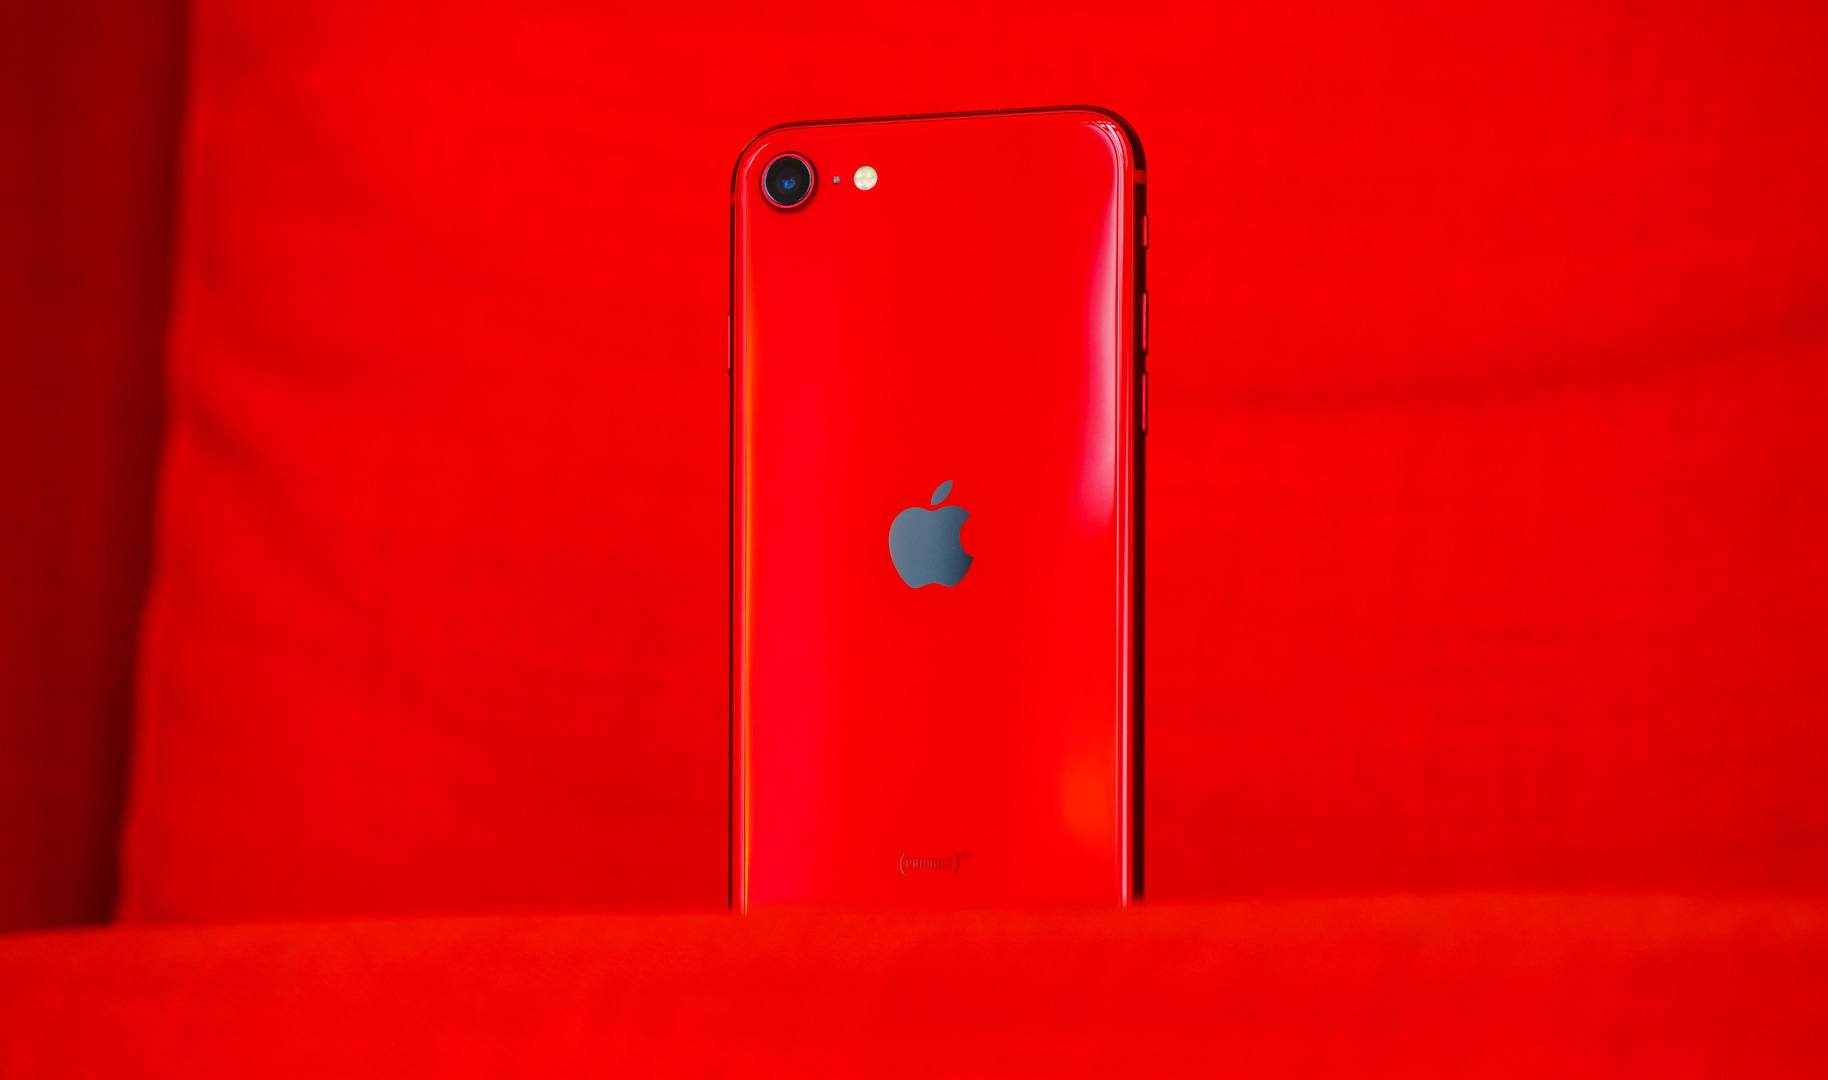 The iPhone SE in red showing the back Apple logo.